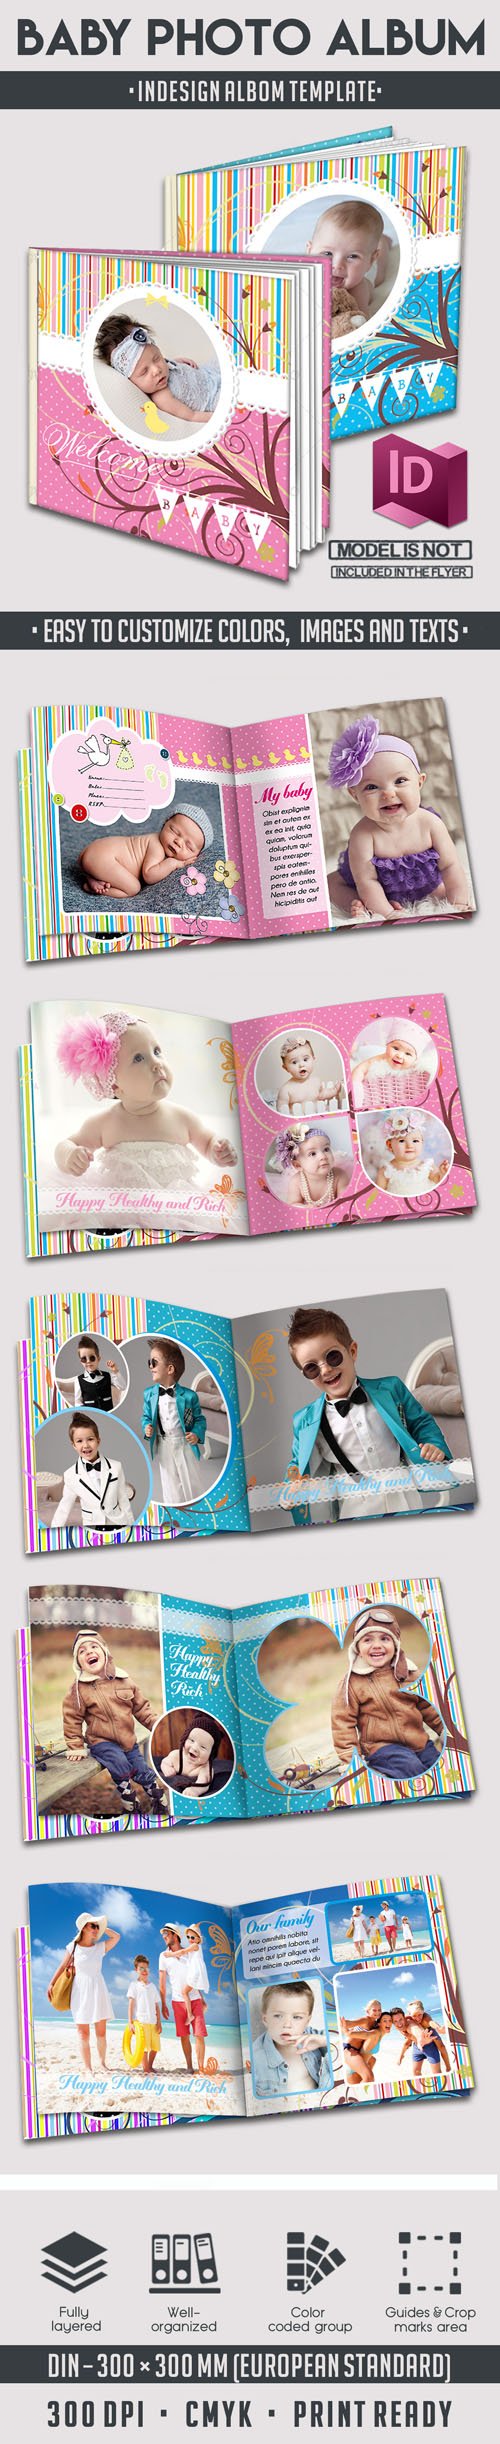 Baby Photo Album - InDesign INDD Templates - 12 Pages